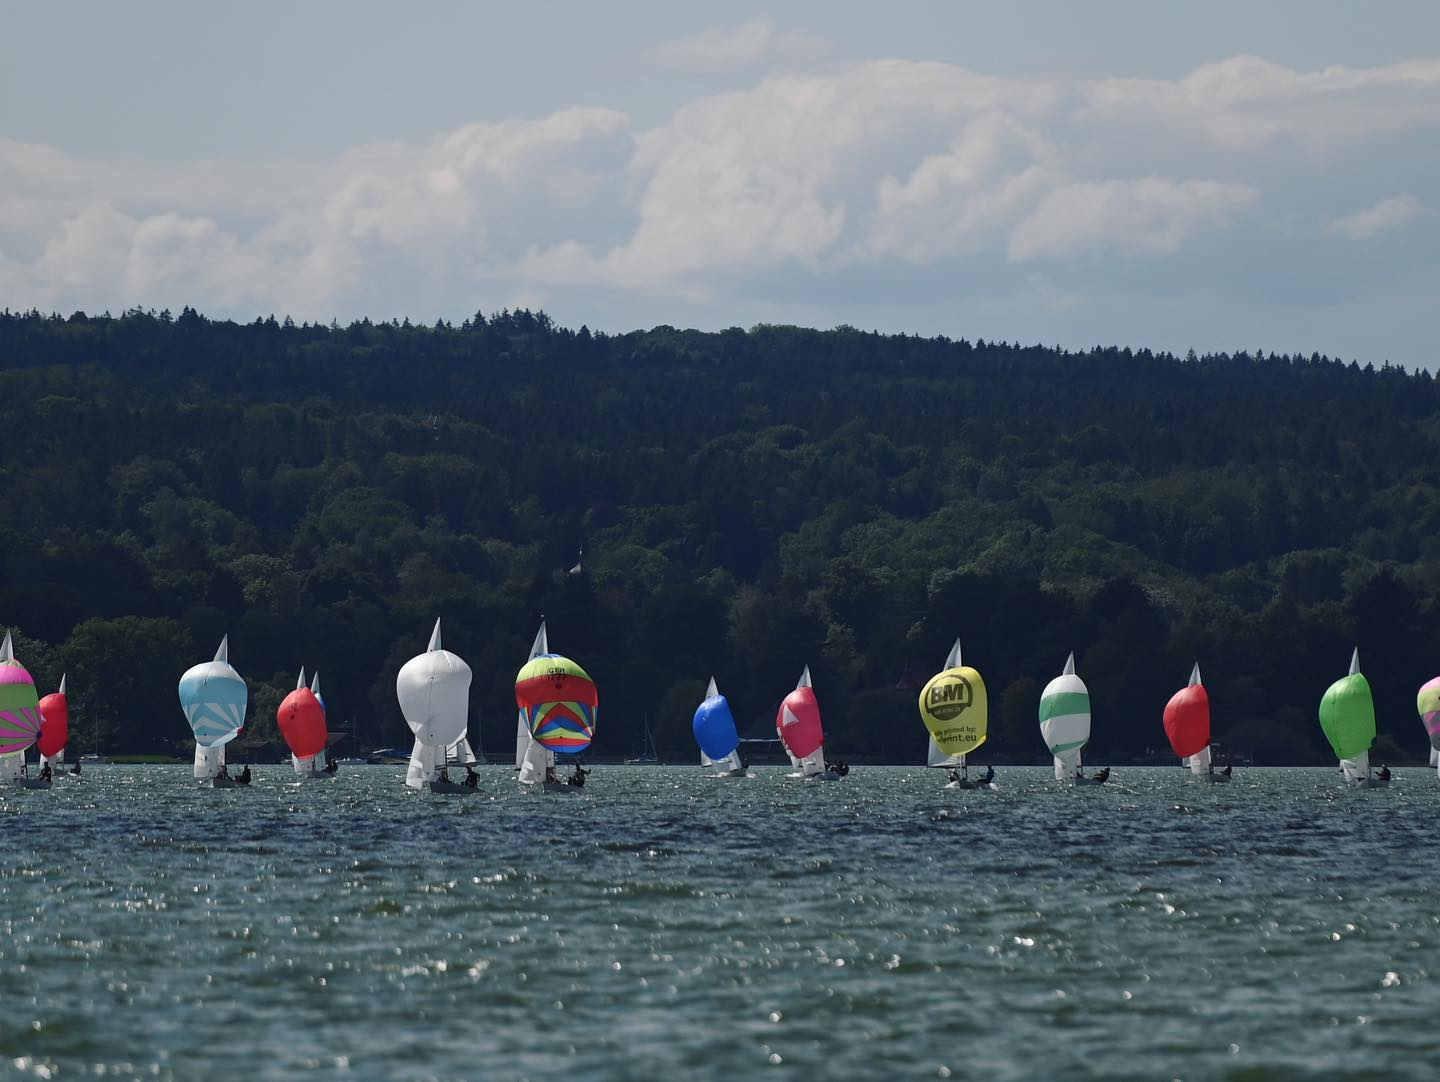  Flying Dutchman  FDCup  Ammersee GER  Final results